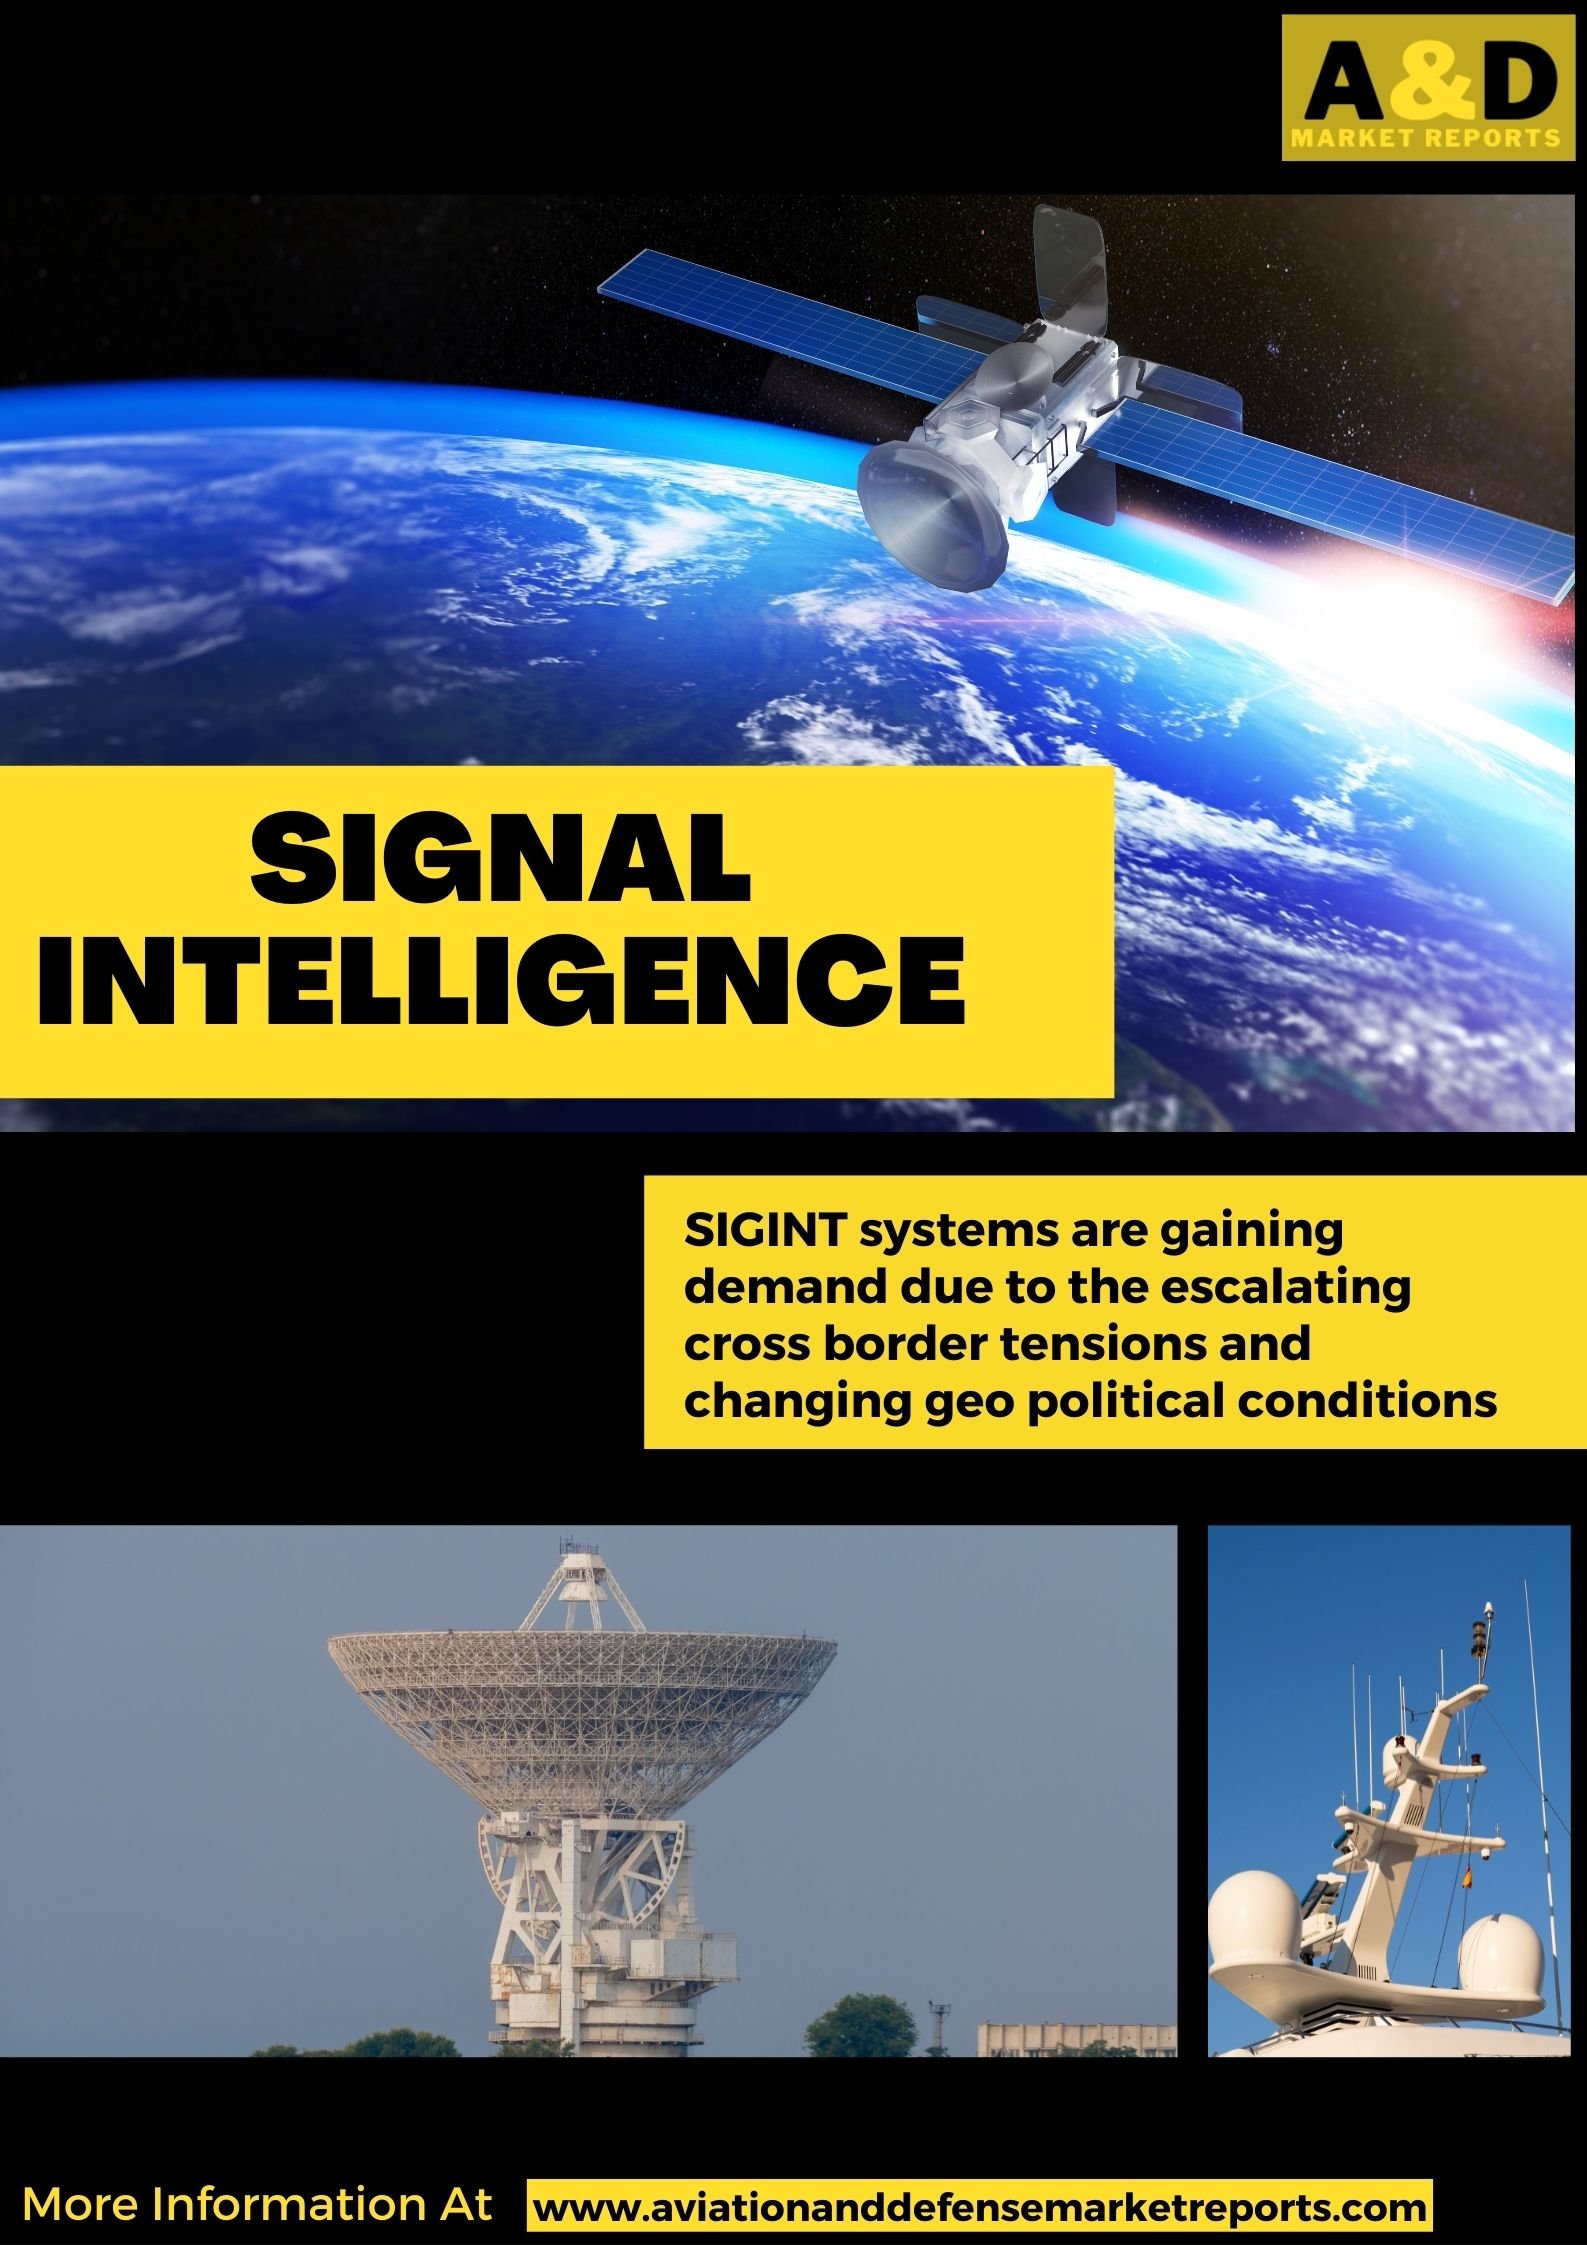 Growing Demand for SIGINT Systems